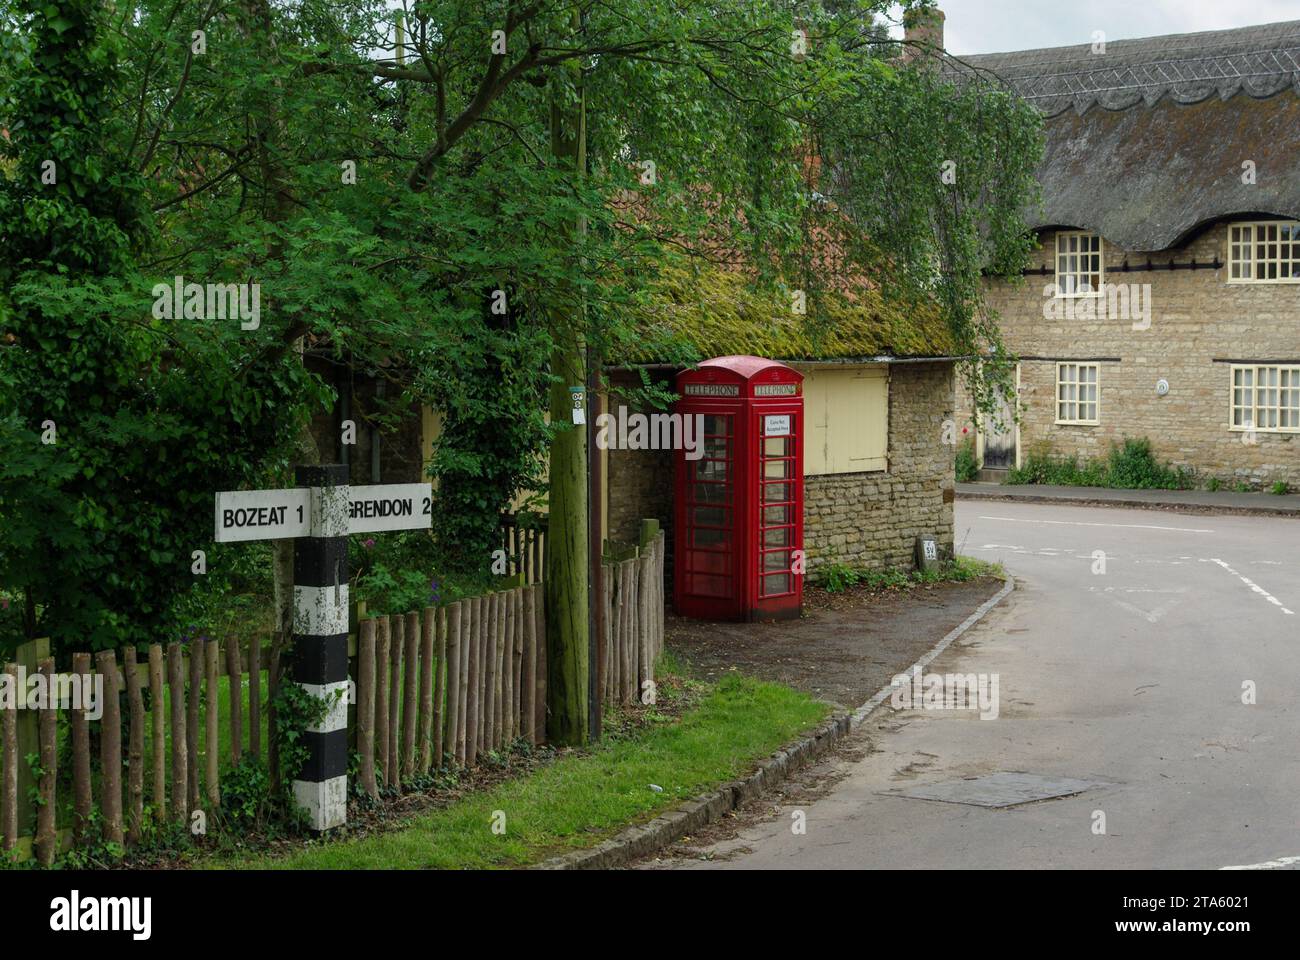 Street scene in the English village of Easton Maudit, Northamptonshire, UK; with black and white road sign, red telephone box and thatched cottage Stock Photo